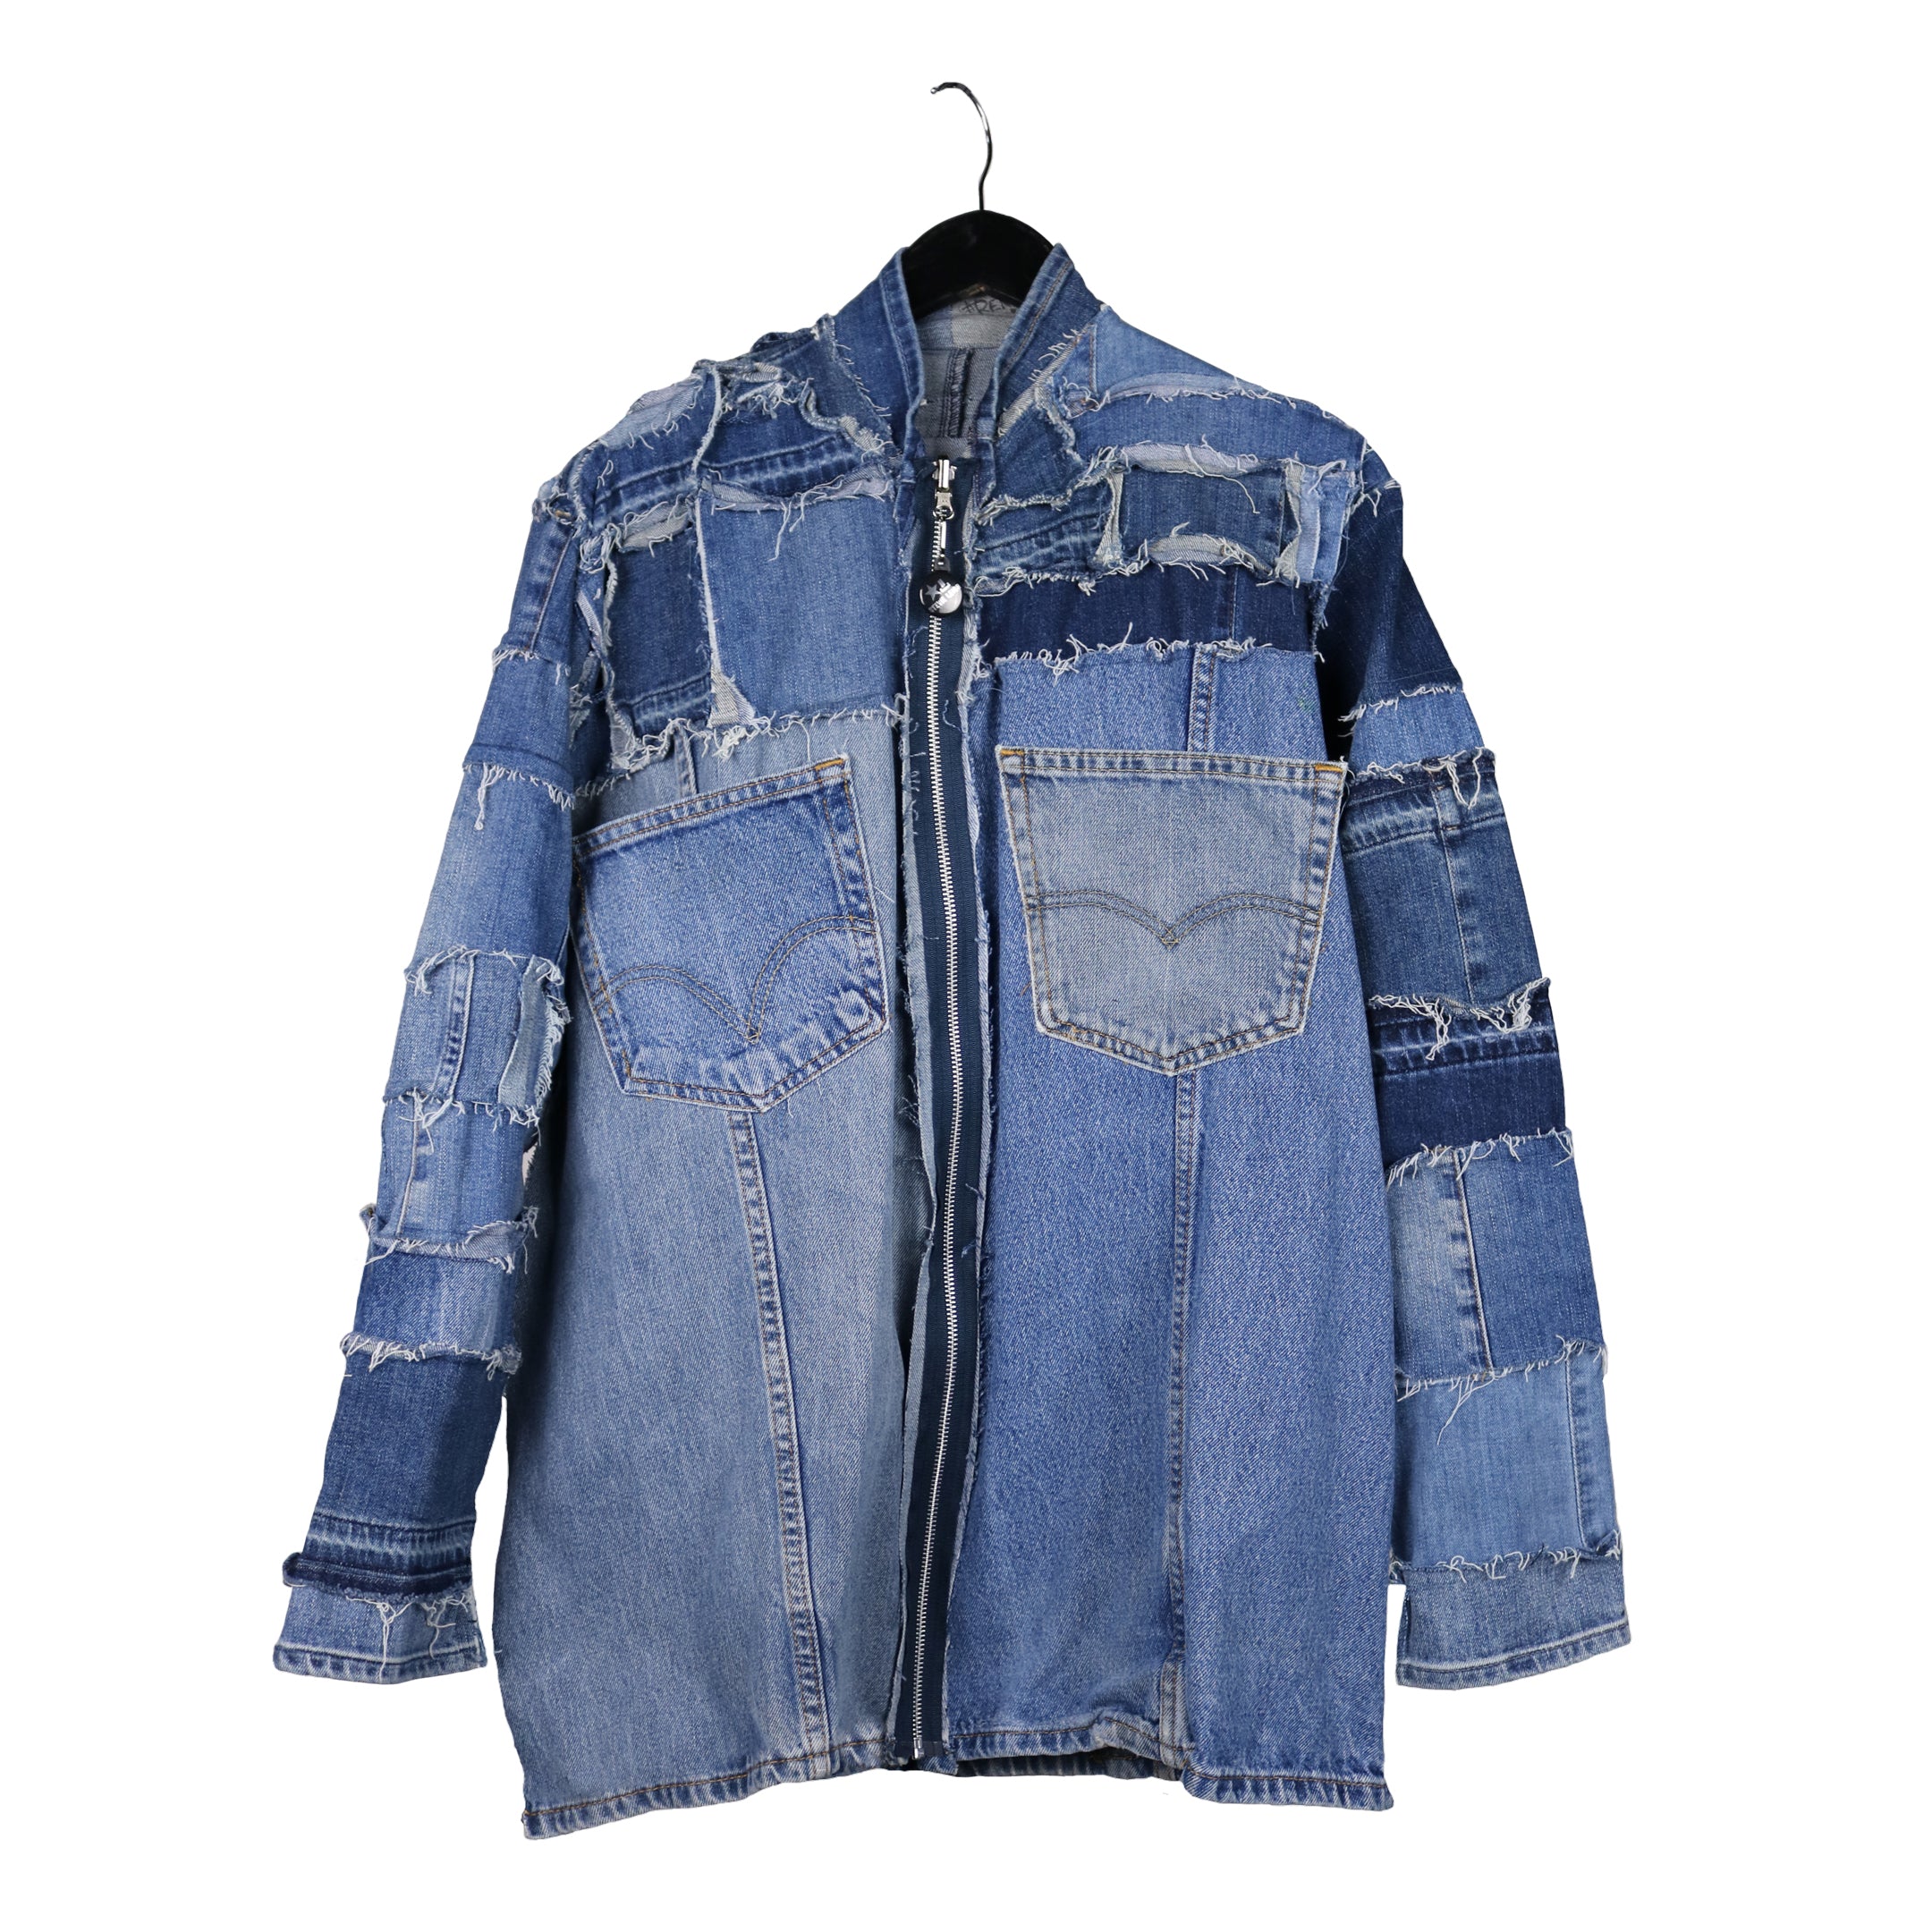 Sustainable denim jacket by stevie leigh